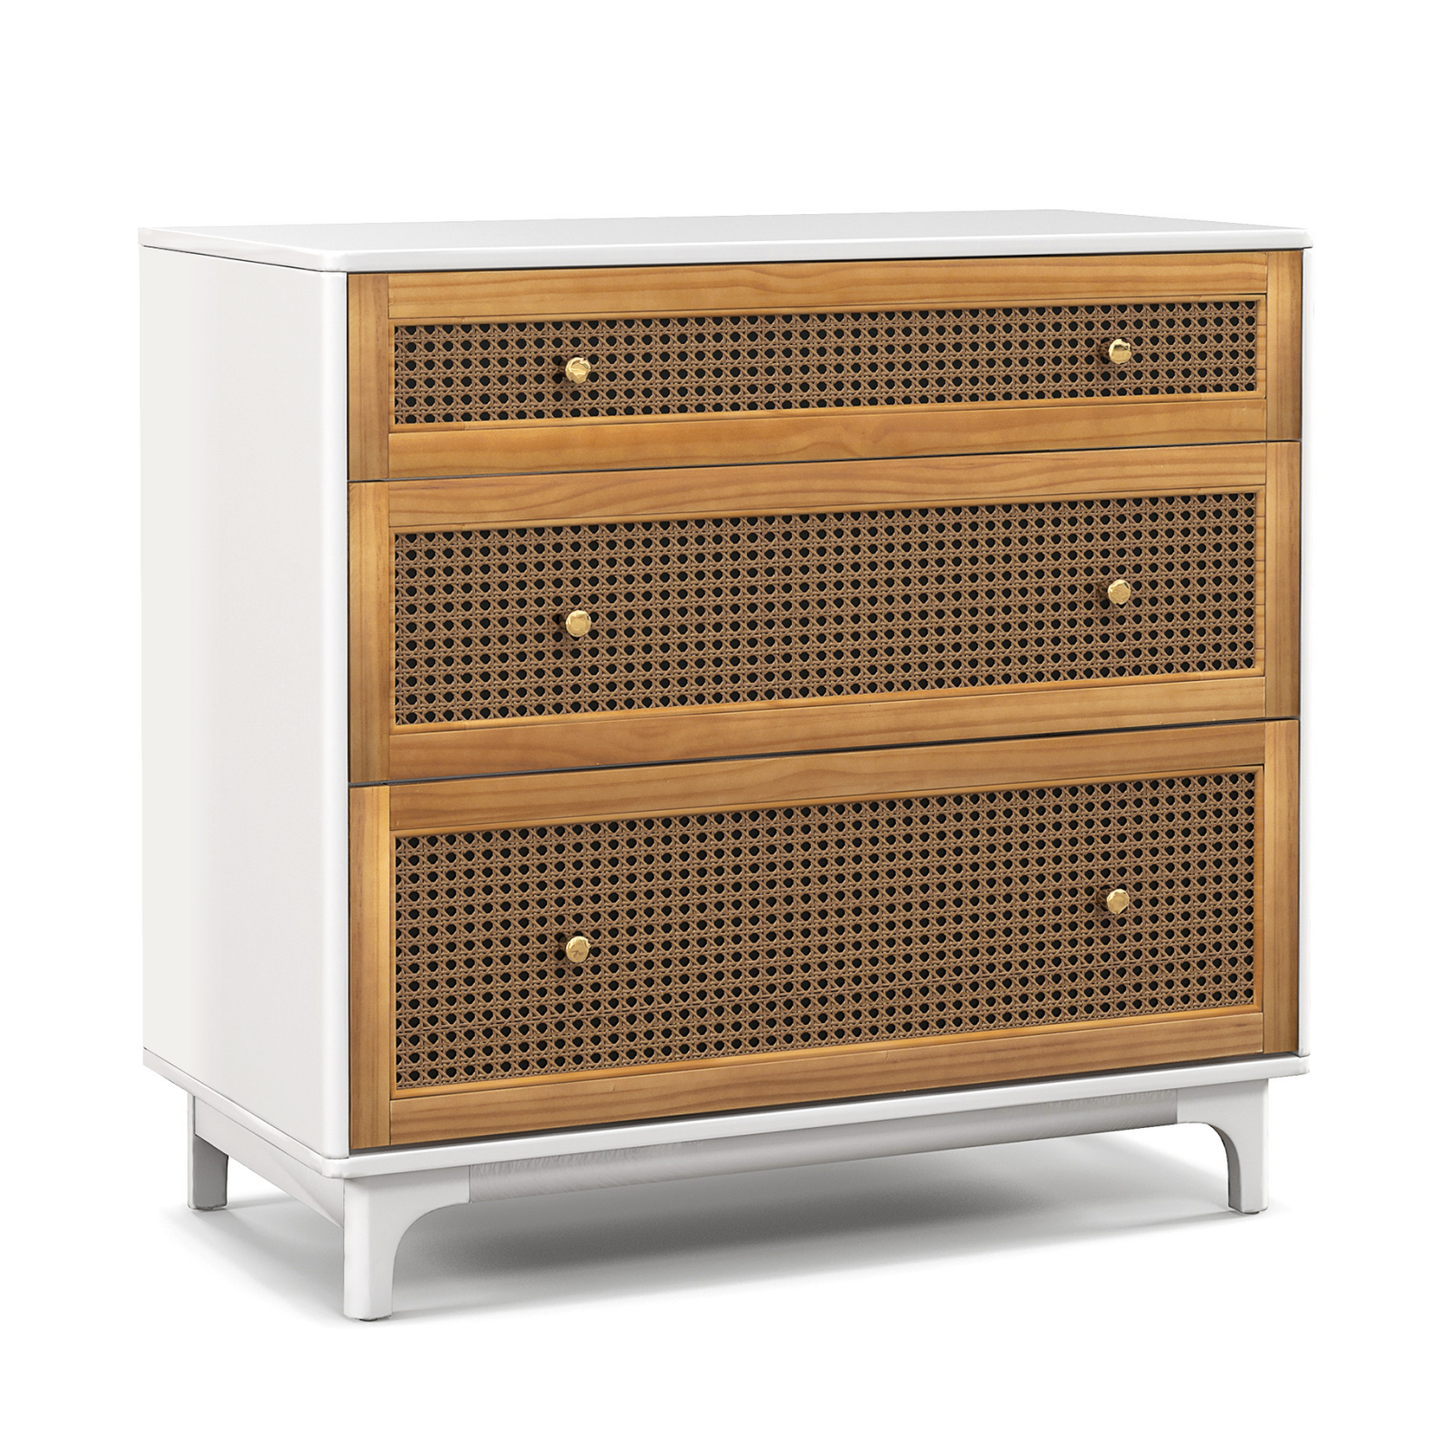 3-Drawer Rattan Dresser Chest with Anti-toppling Device, Brown